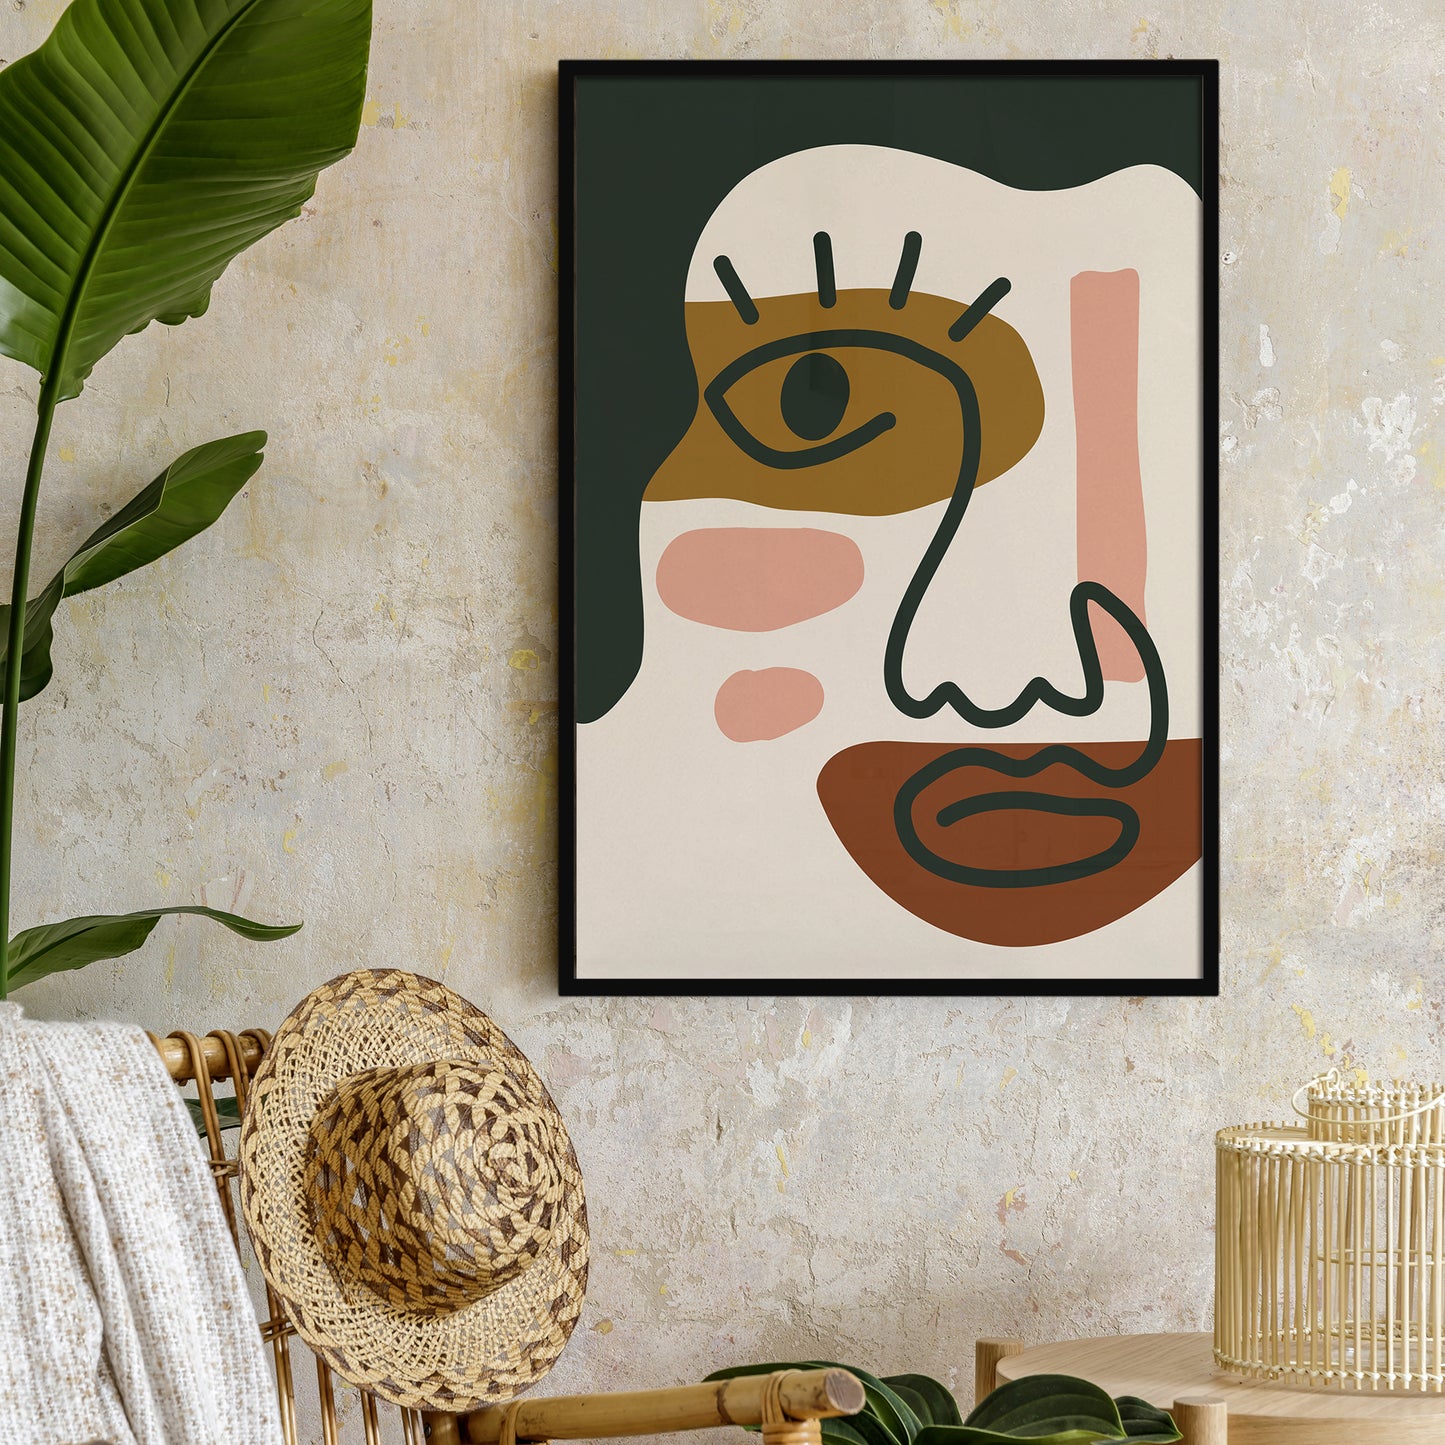 Earth Colors Cubist Drawing Poster